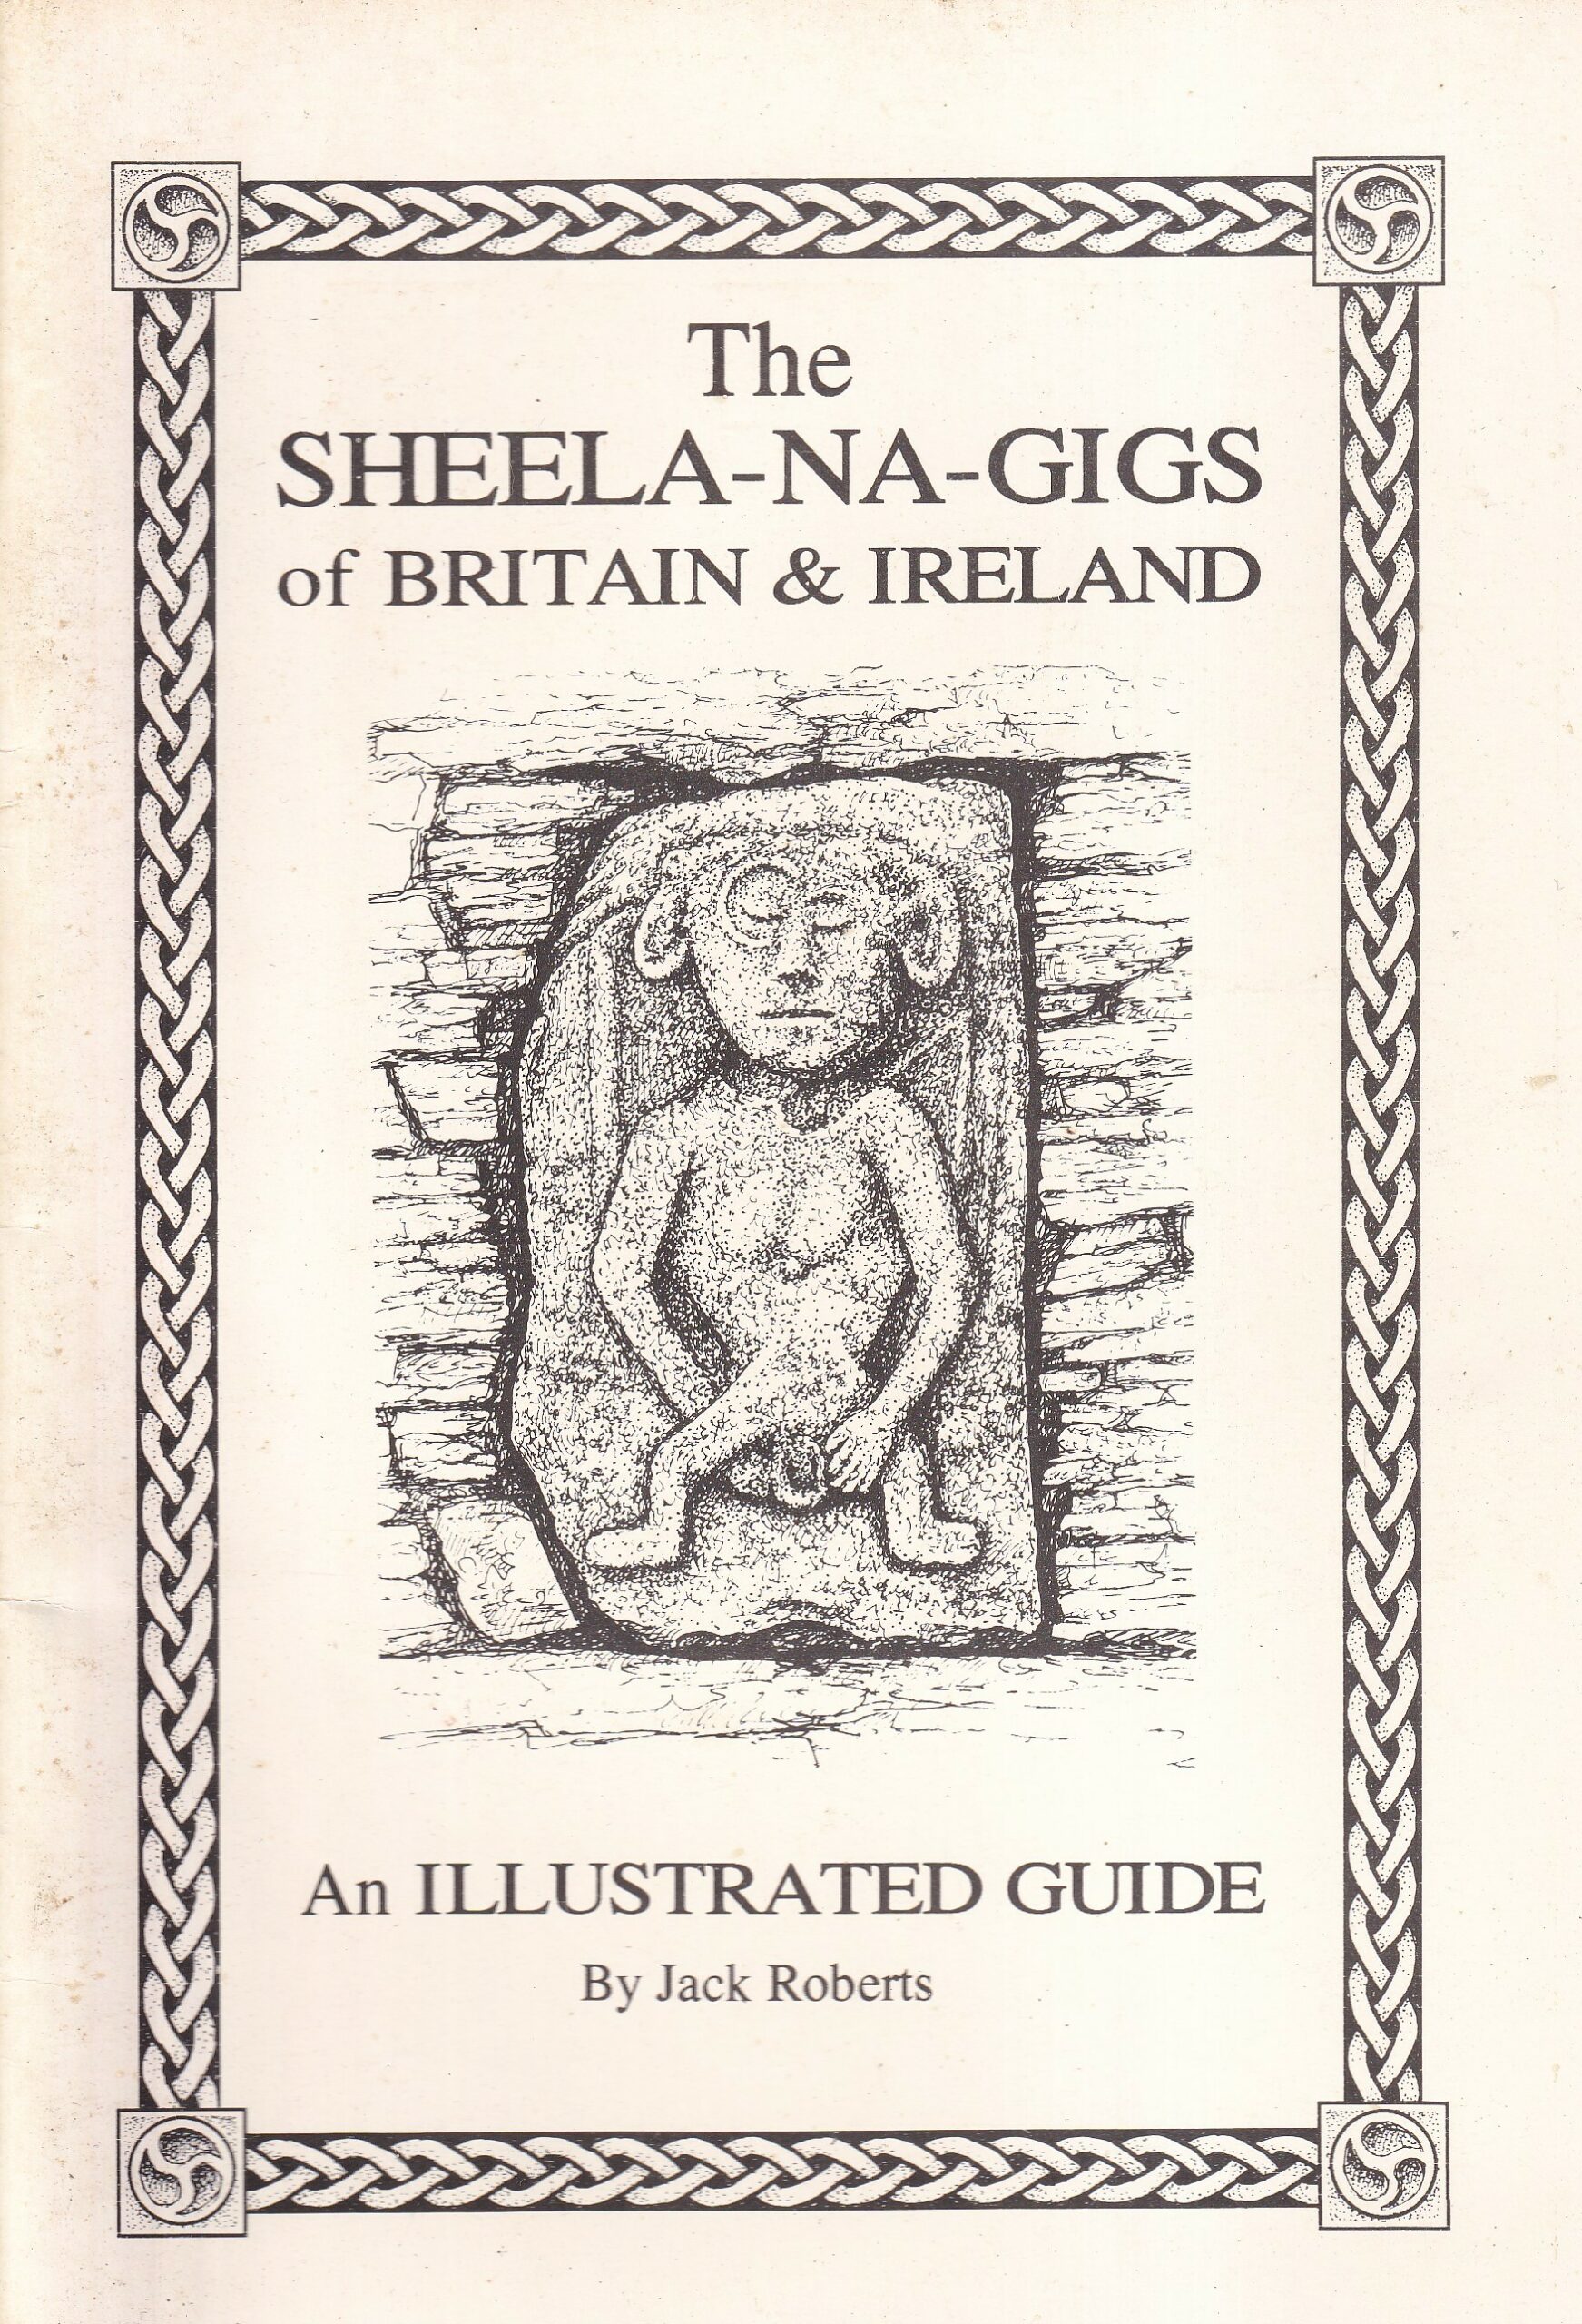 The Sheela-Na-Gigs of Britain and Ireland: An Illustrated Guide | Jack Roberts | Charlie Byrne's